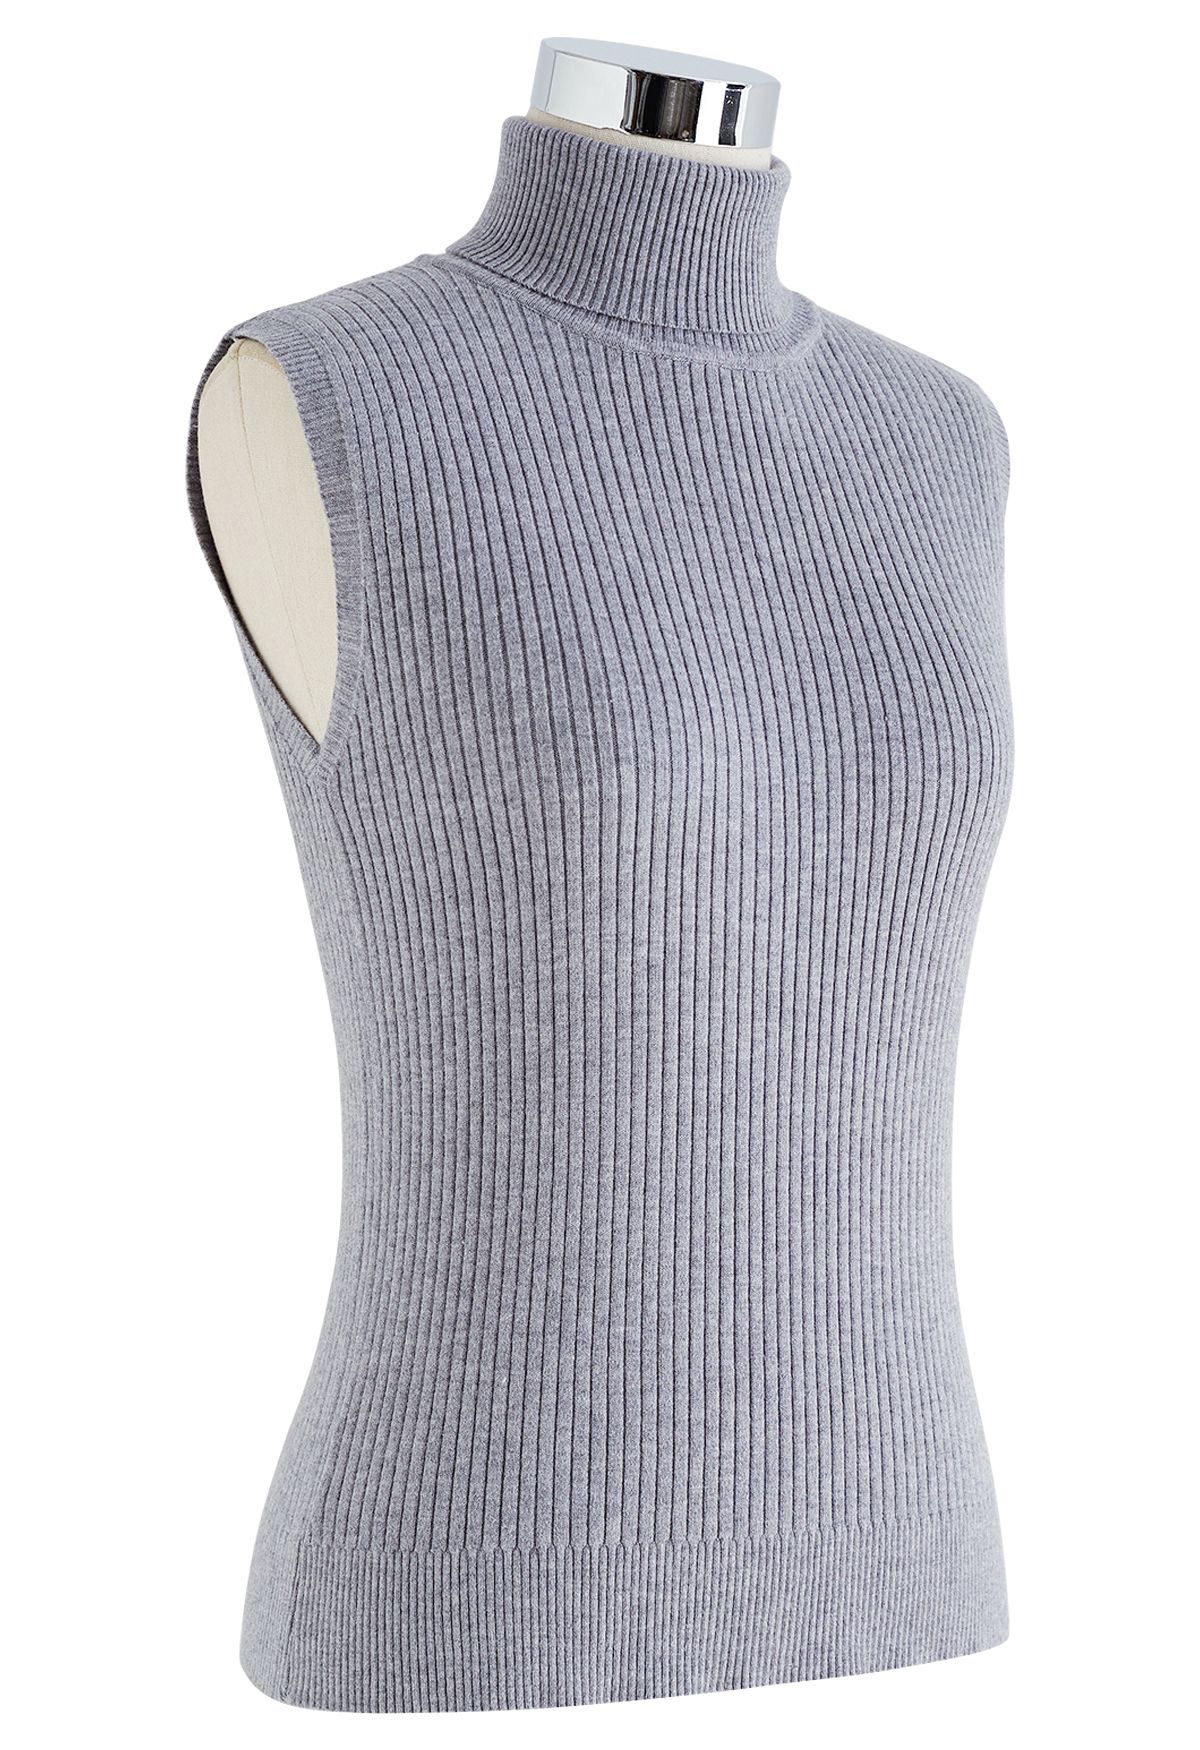 Turtleneck Soft Knit Sleeveless Top in Grey - Retro, Indie and Unique ...